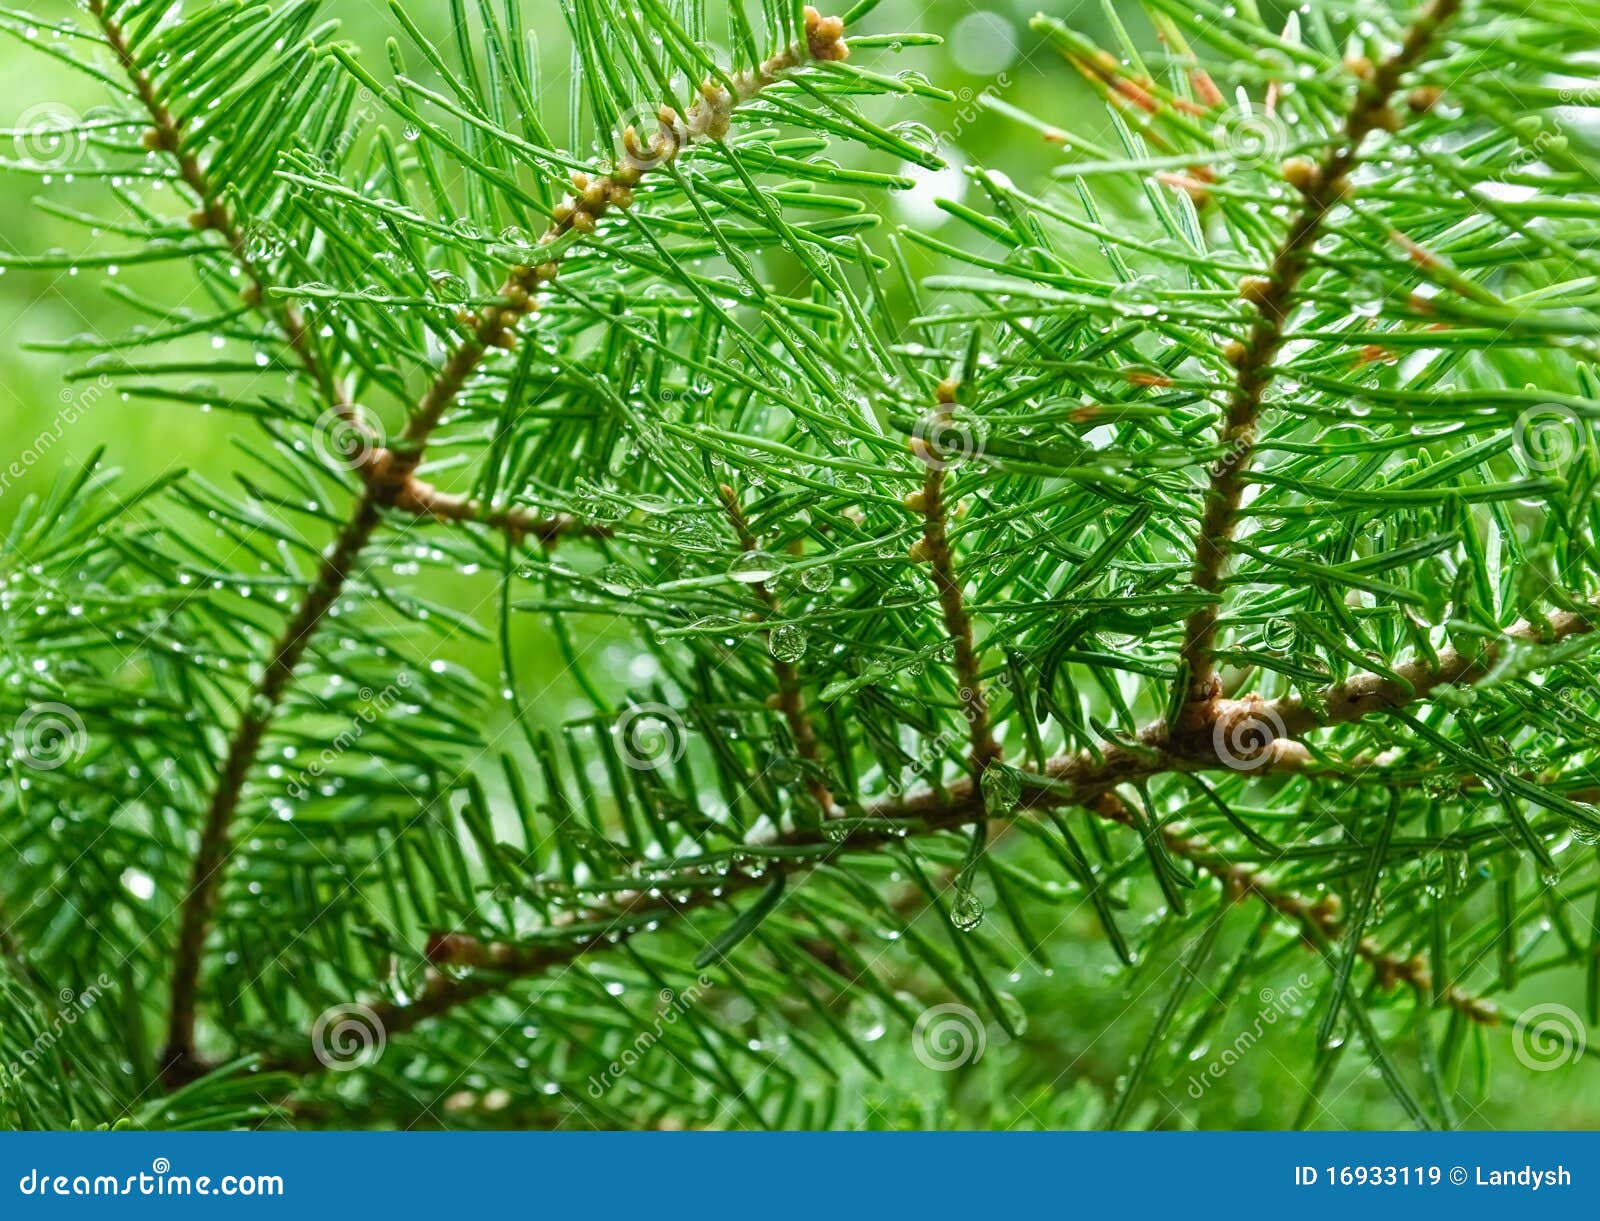 green branches of pine tree, needles